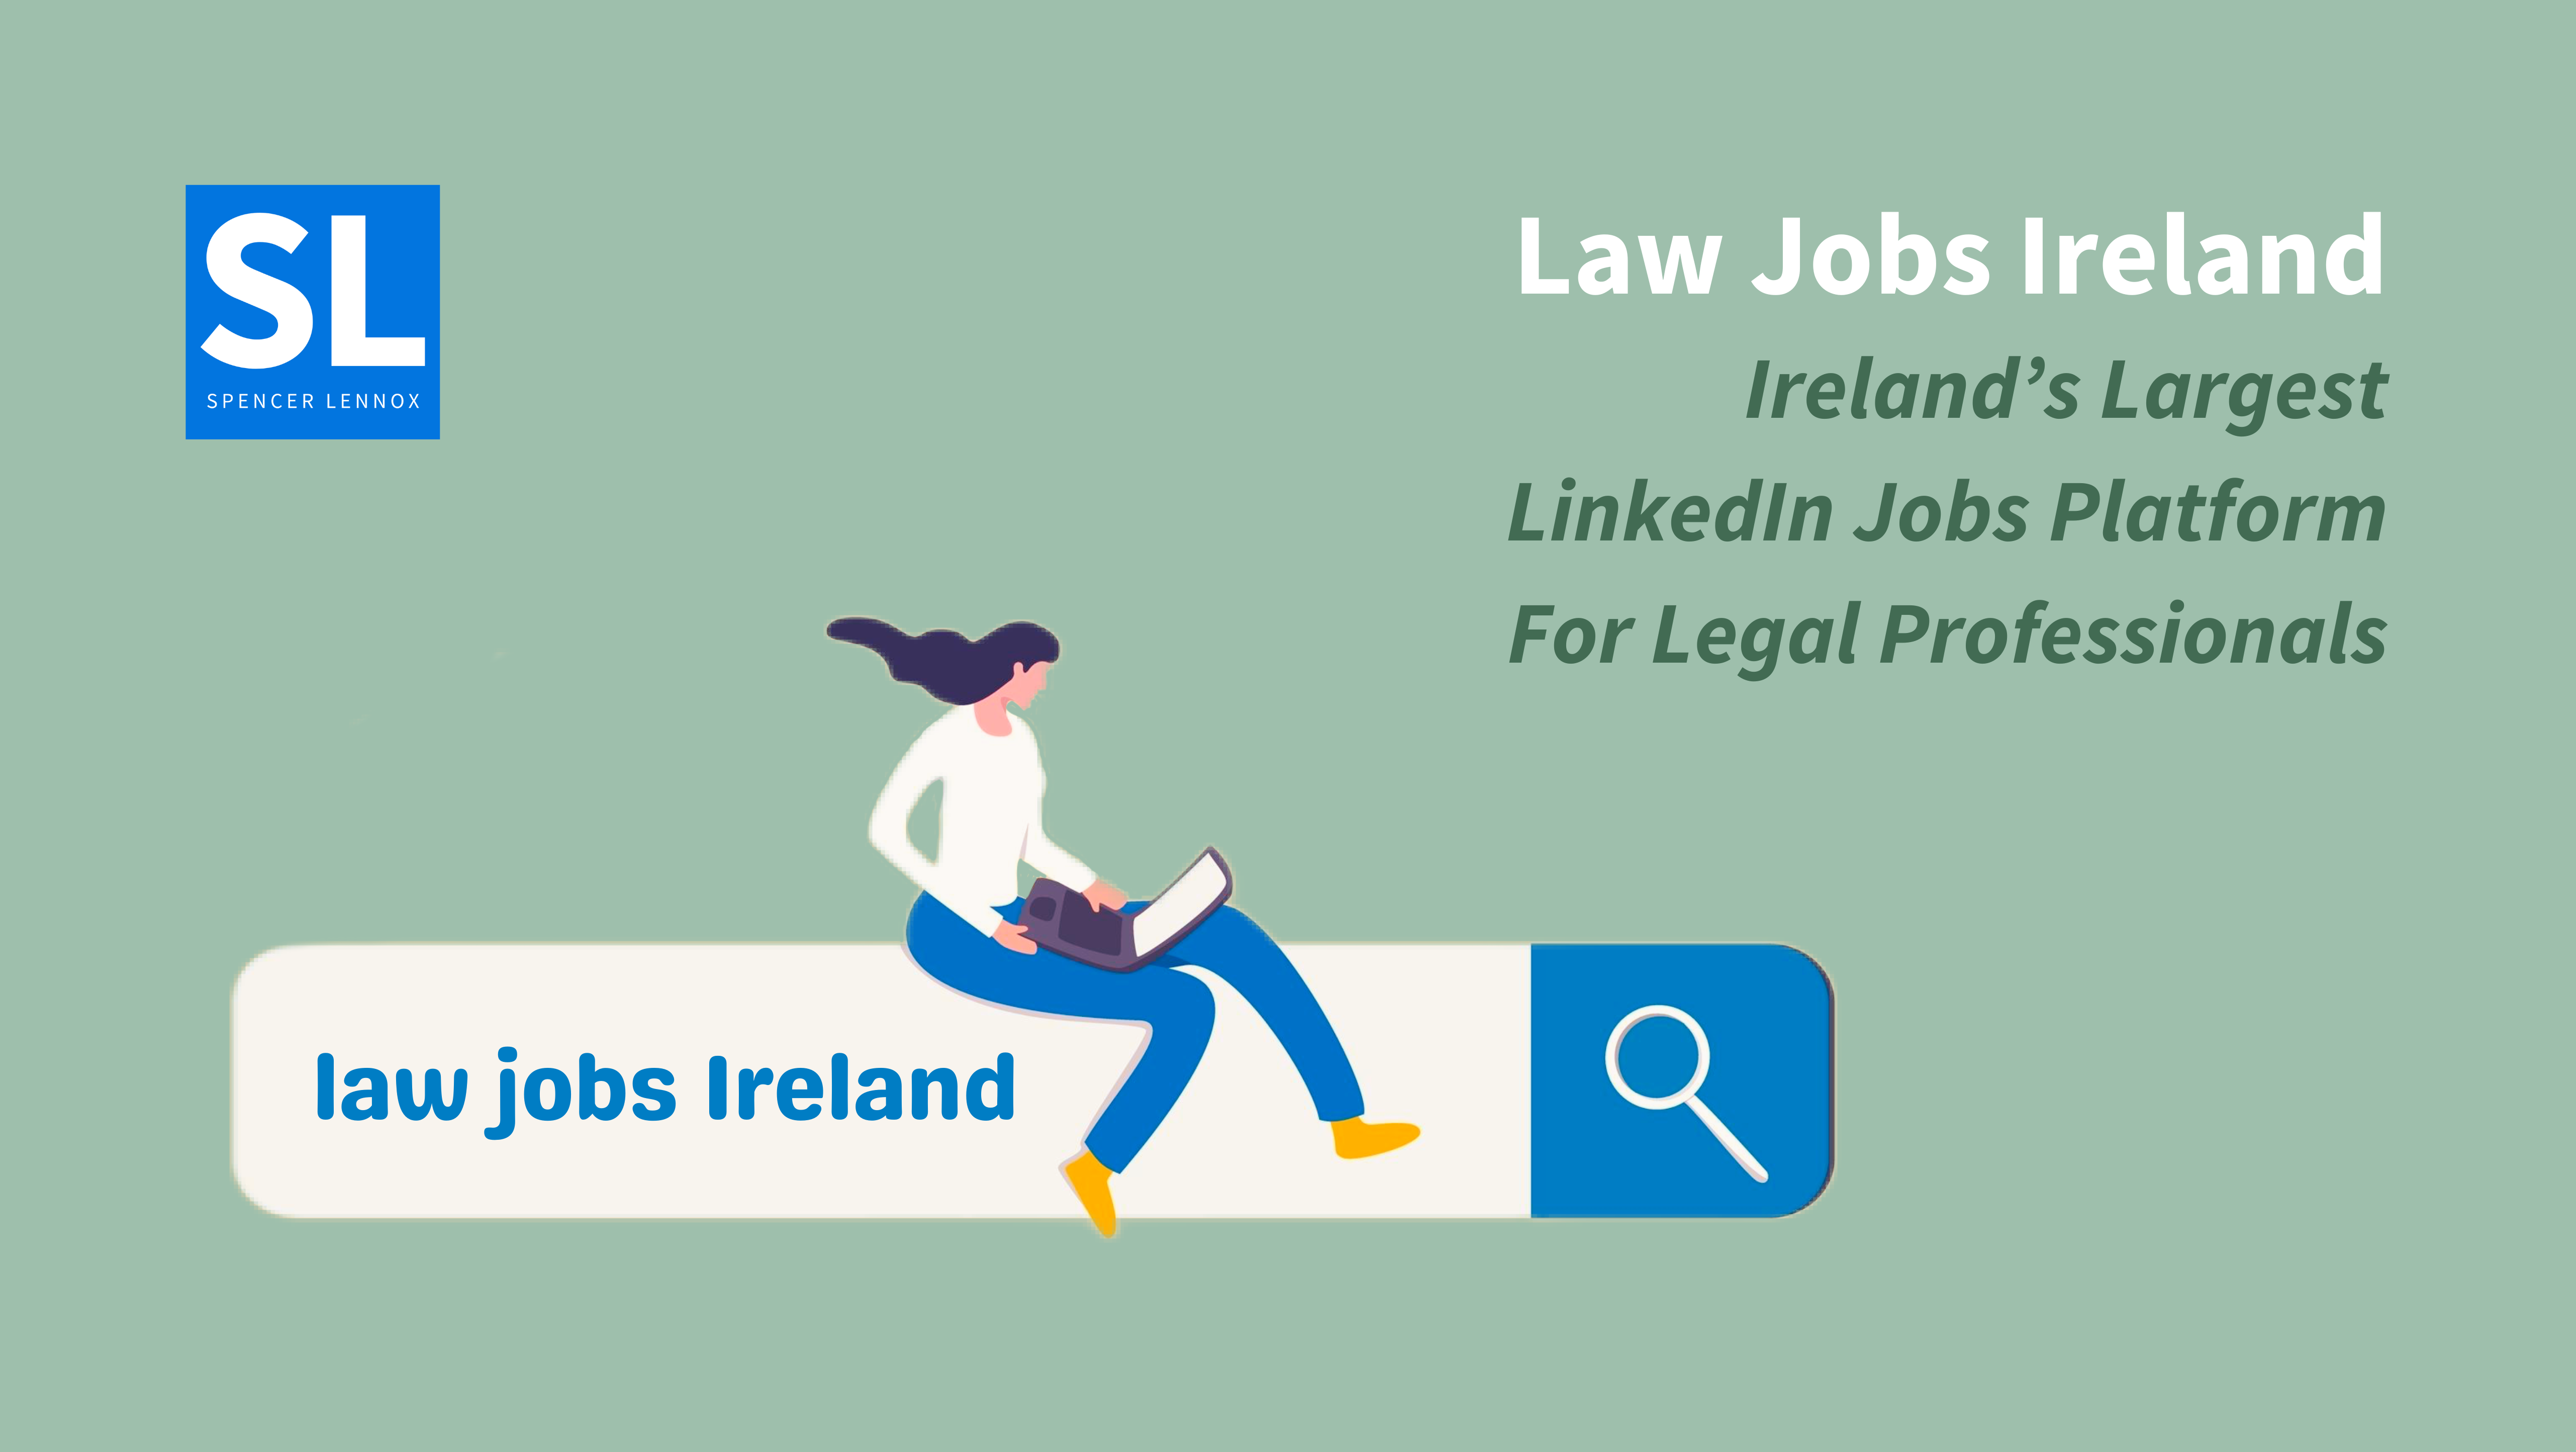 Law Jobs Ireland - Ireland's leading LinkedIn jobs platform exclusively for legal professionals.